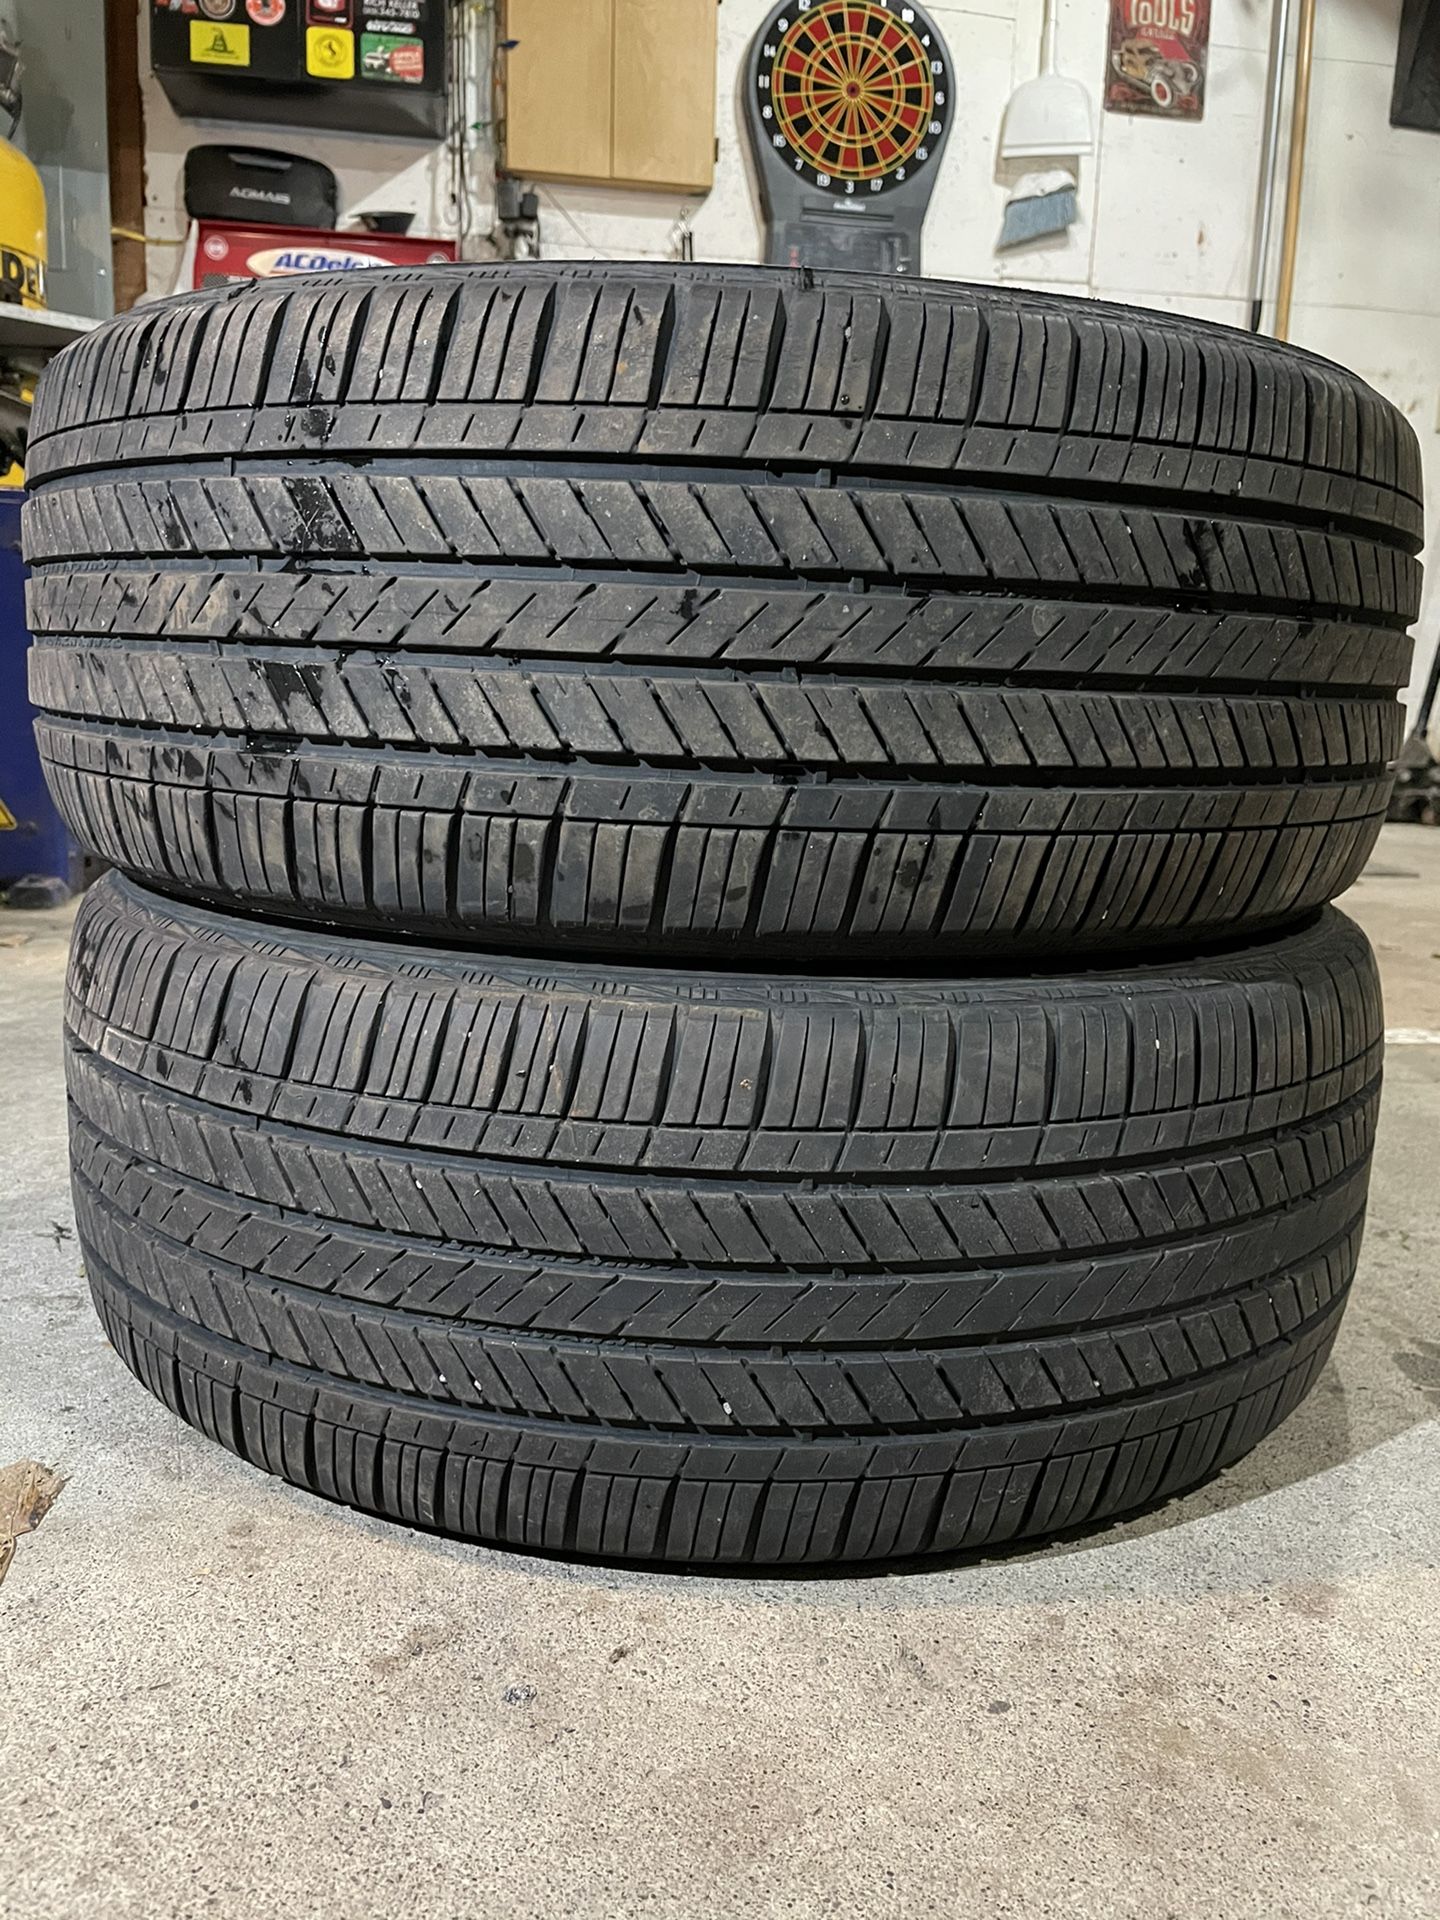 Two - 215/55/17 Goodyear Assurance Fuel Max All-Season Tires